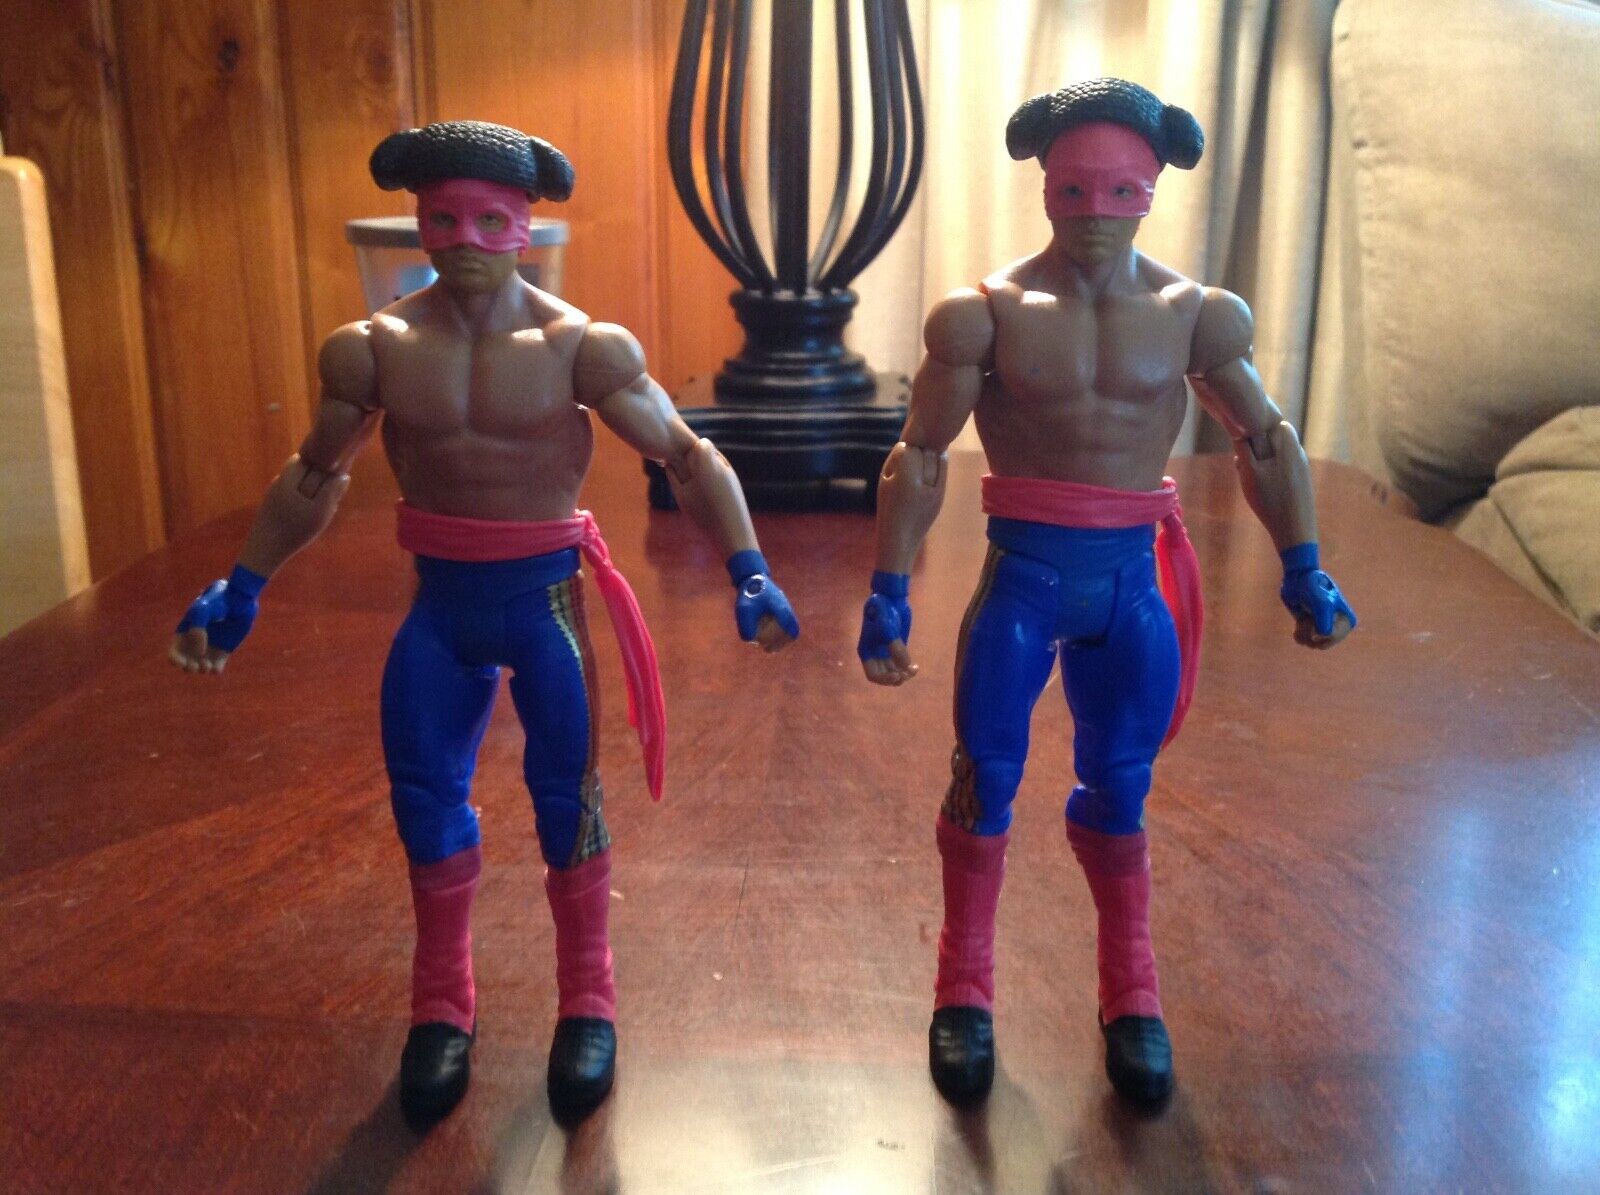 WWE BATTLE PACK LOS MATADORES. EPICO AND PRIMO COLON ACTION FIGURES. **USED** WWE